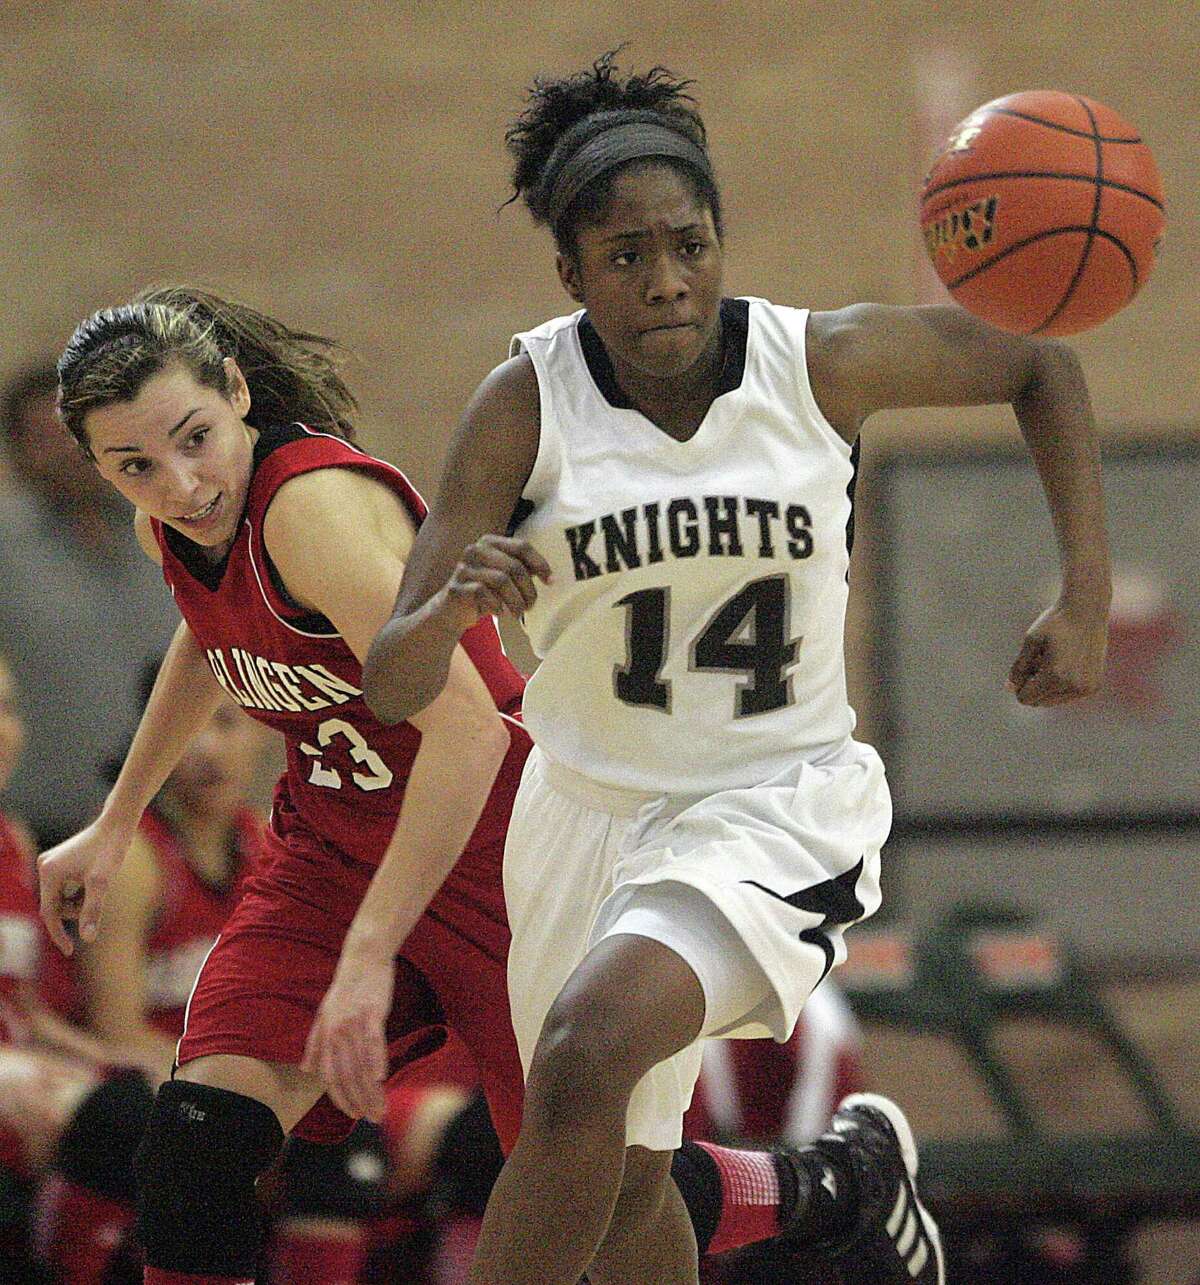 Steele guard McKenzie Calvert hopes to help the Knights take the next step this season by making another run at the Class 5A state title that barely eluded them in March.